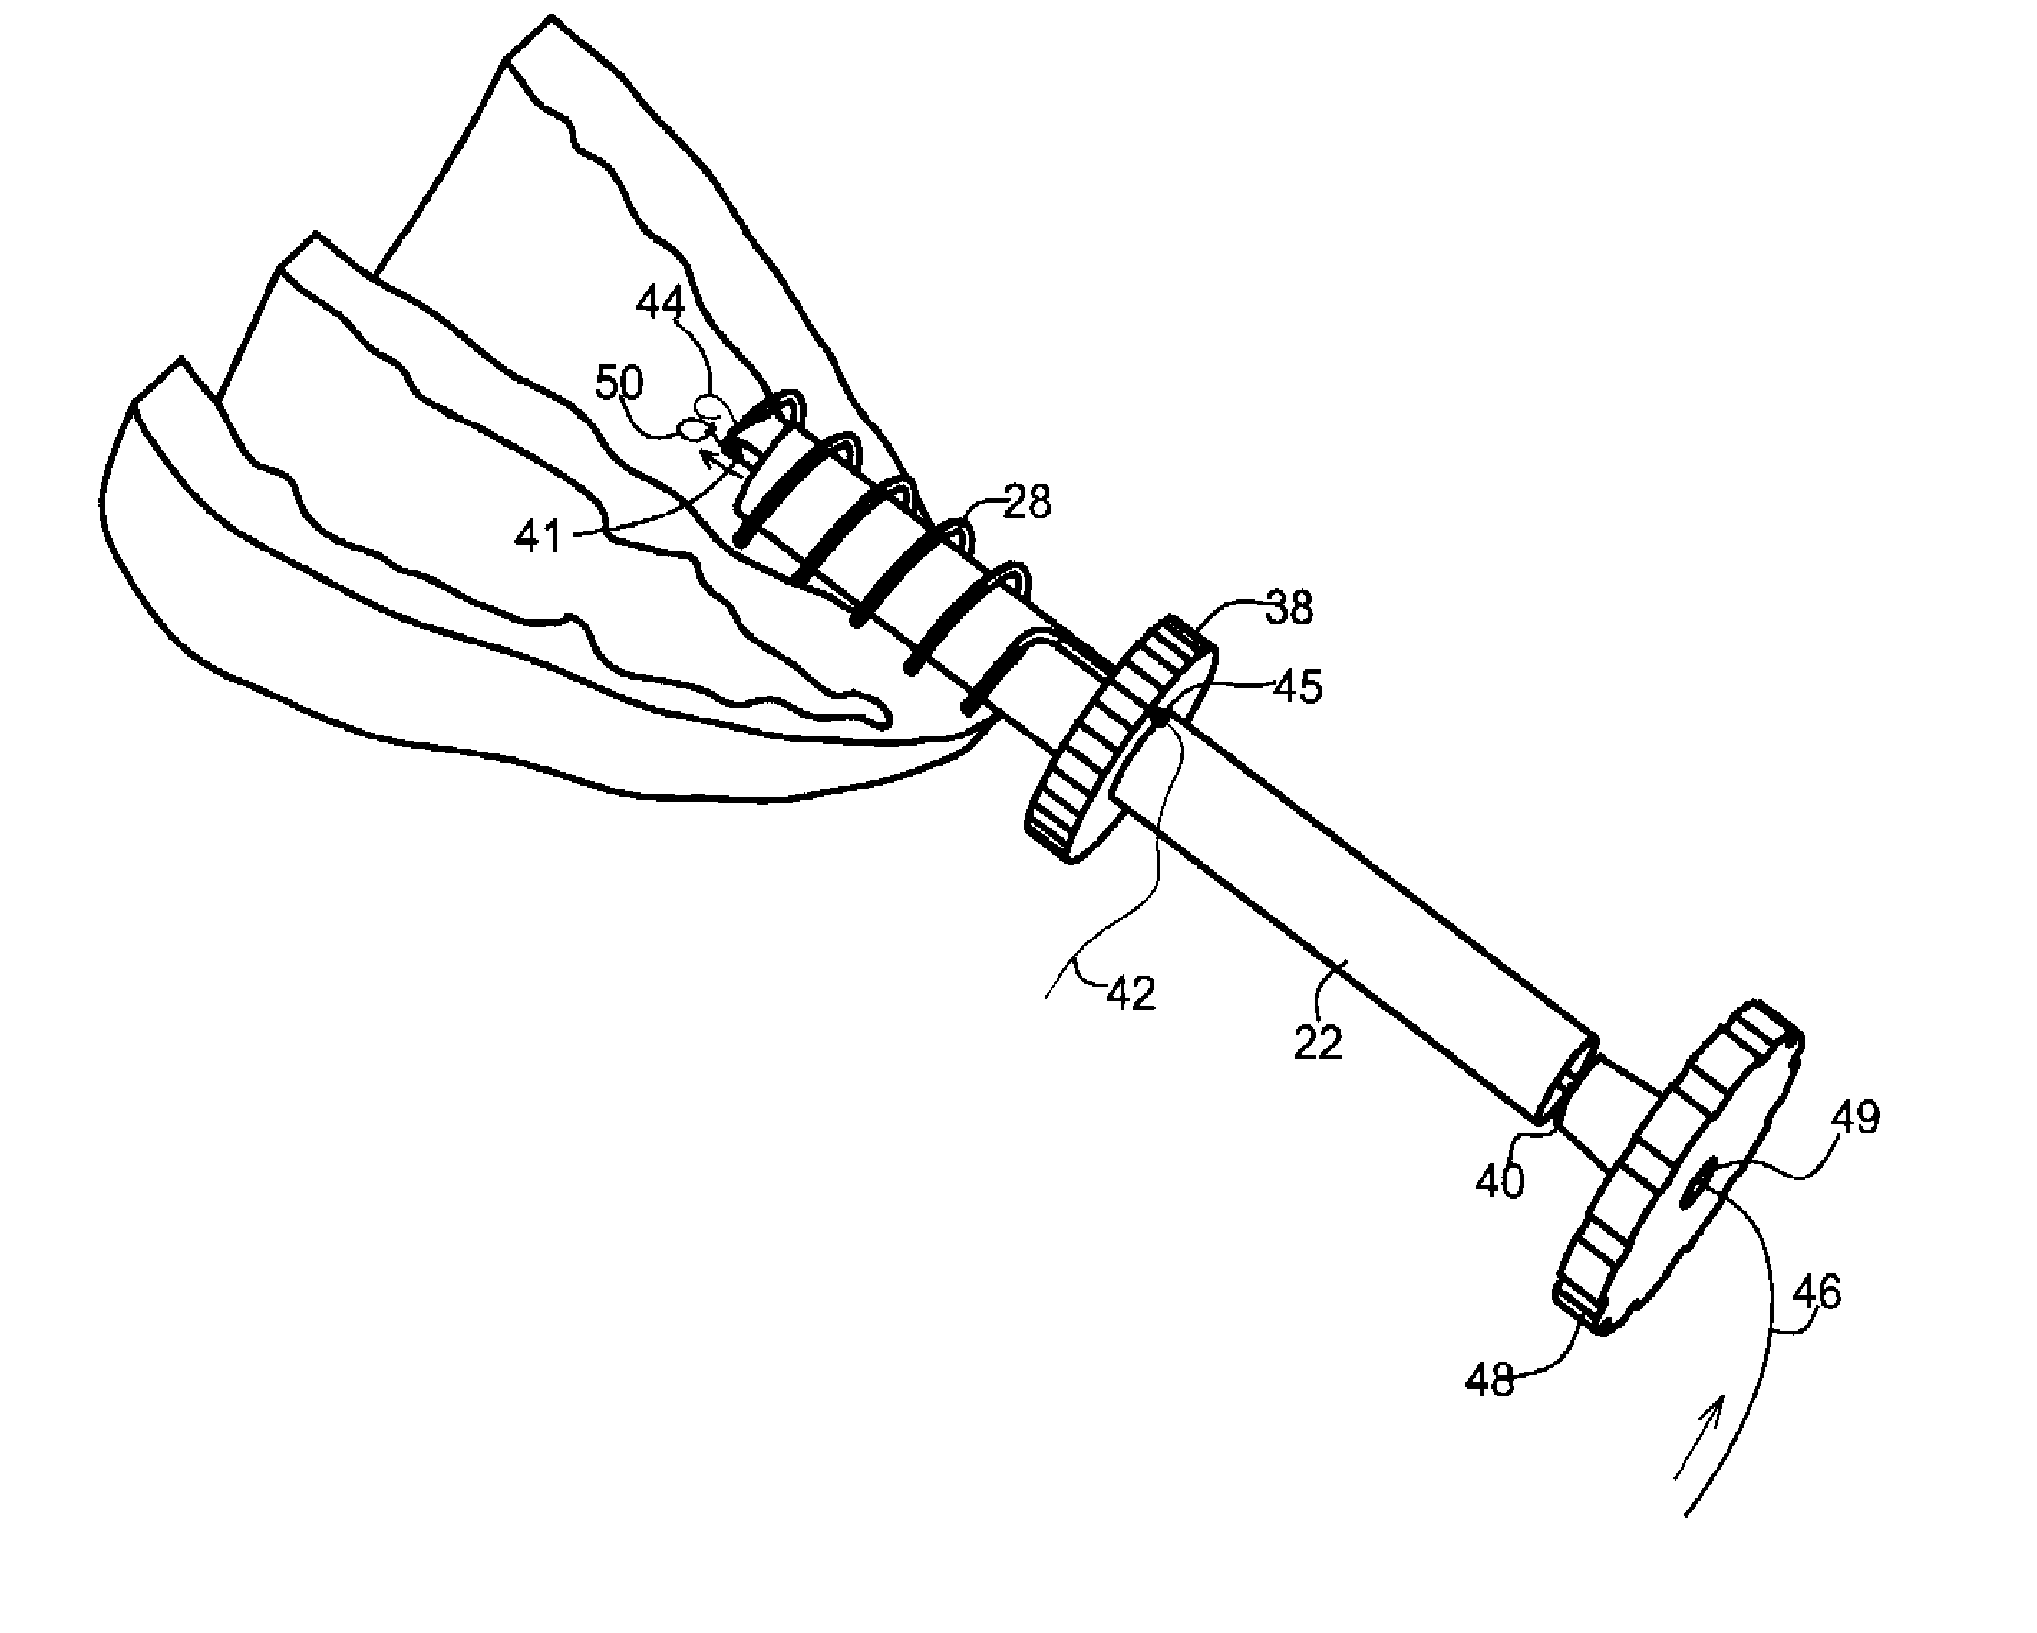 Medical suturing device and method for use thereof